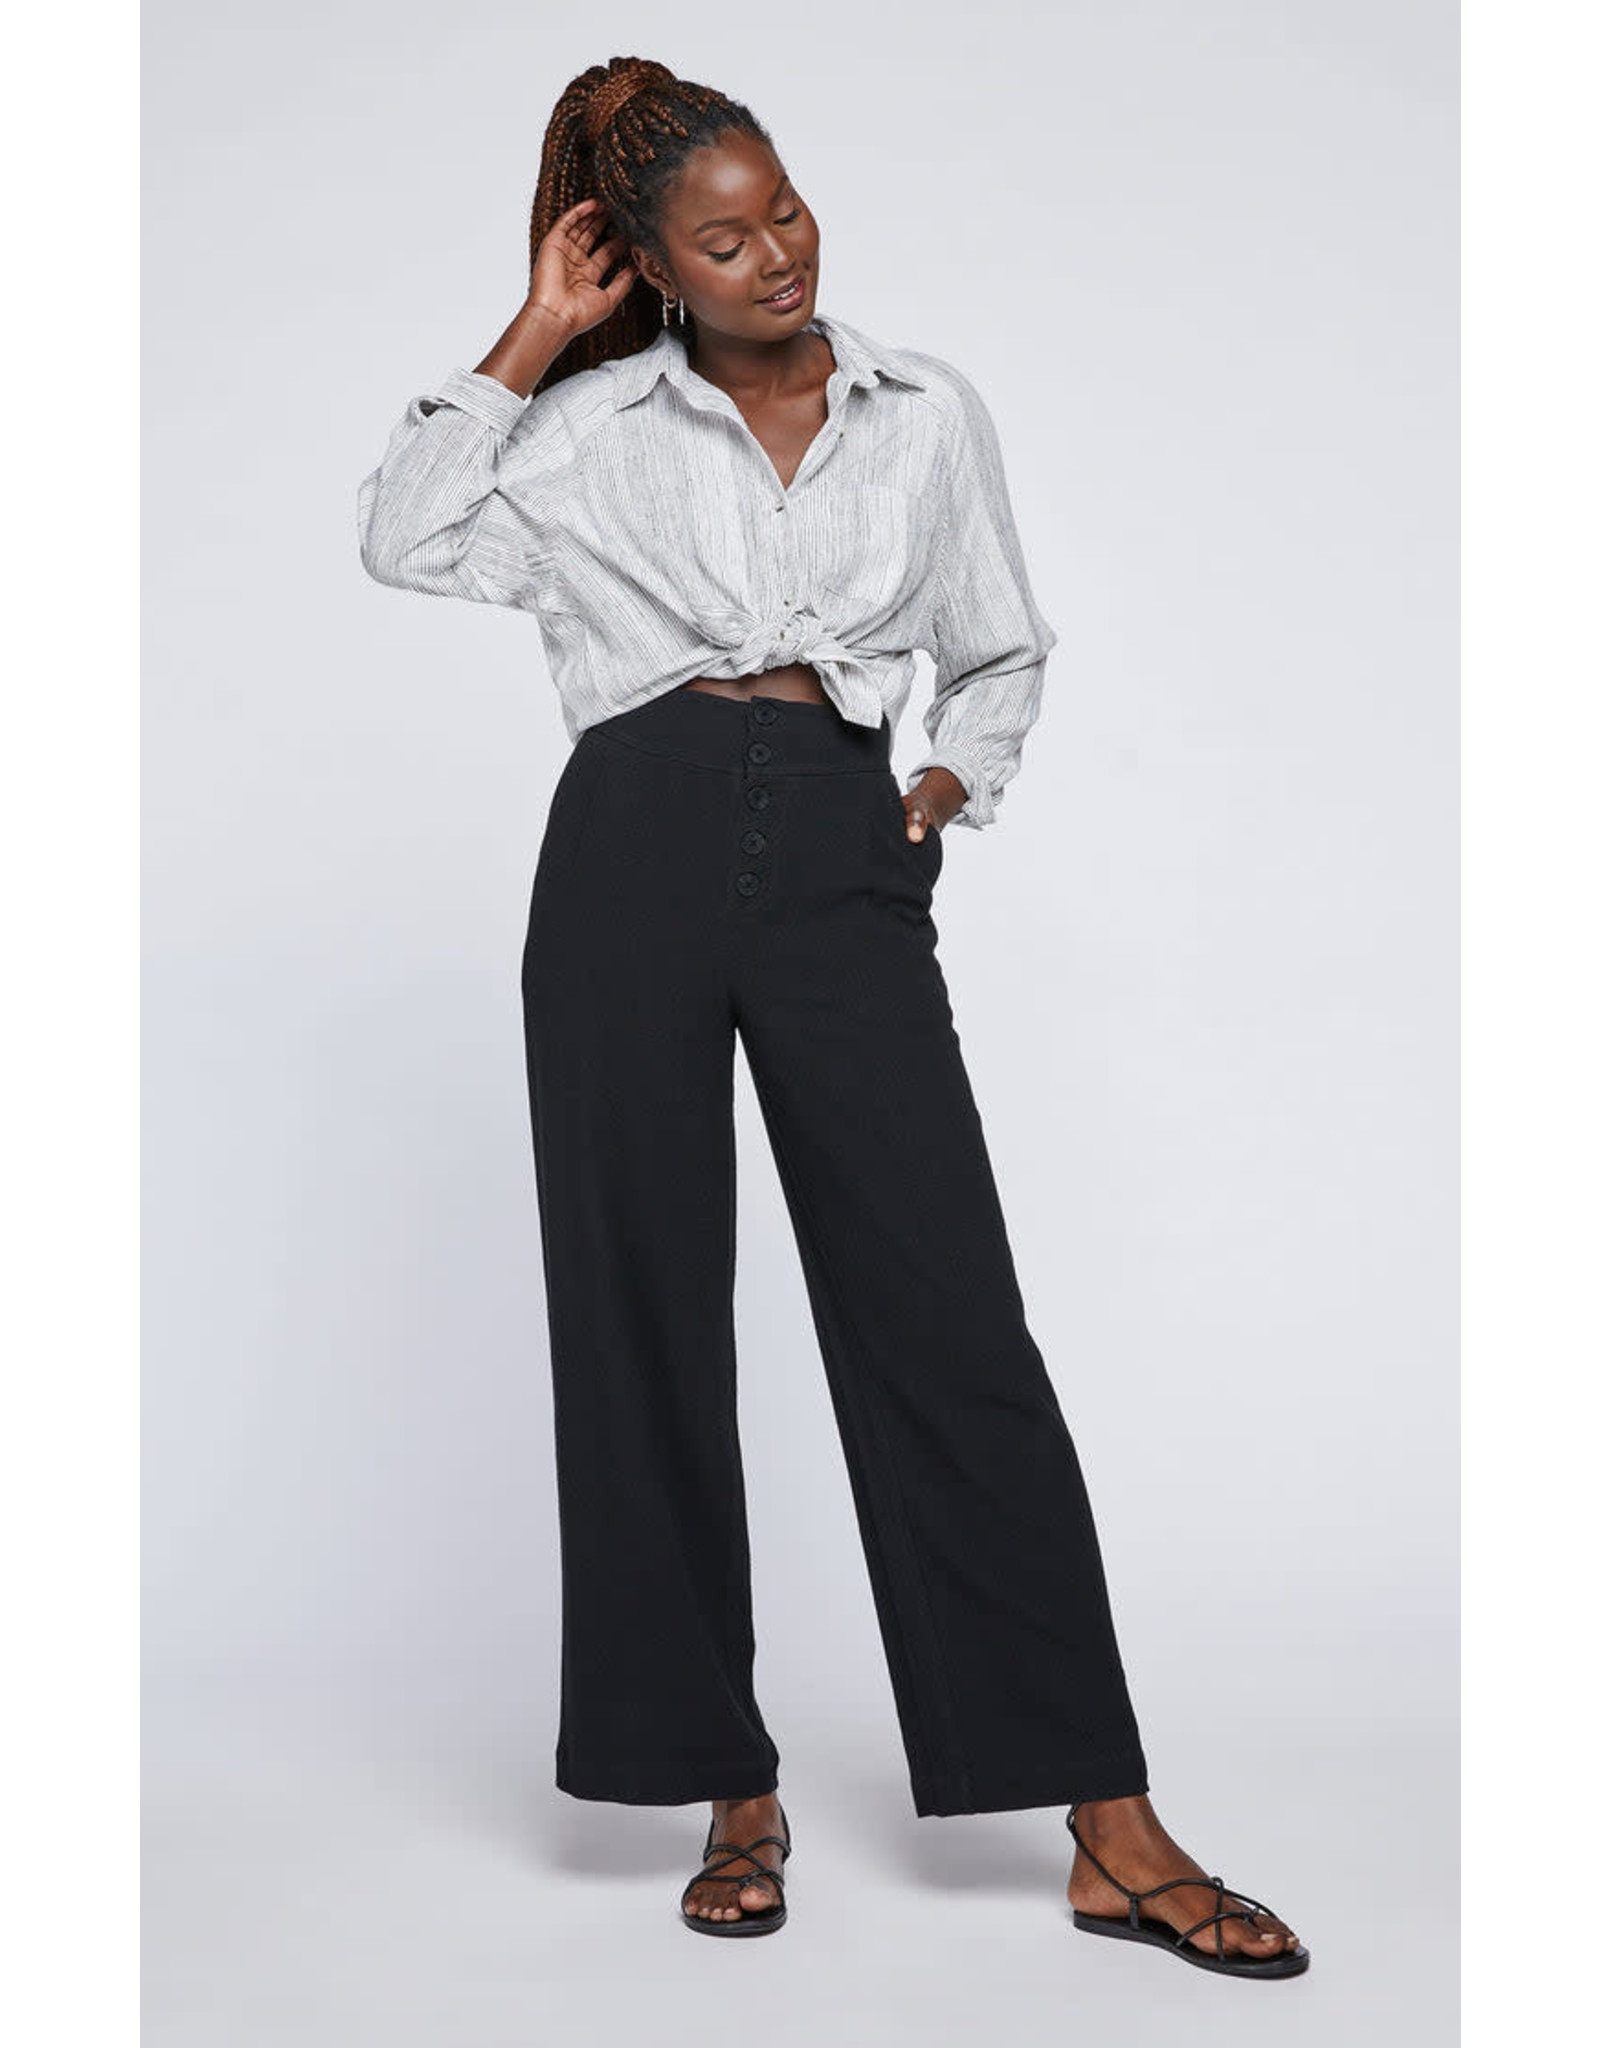 BGS Gentle Fawn - High Waisted Linen Pant